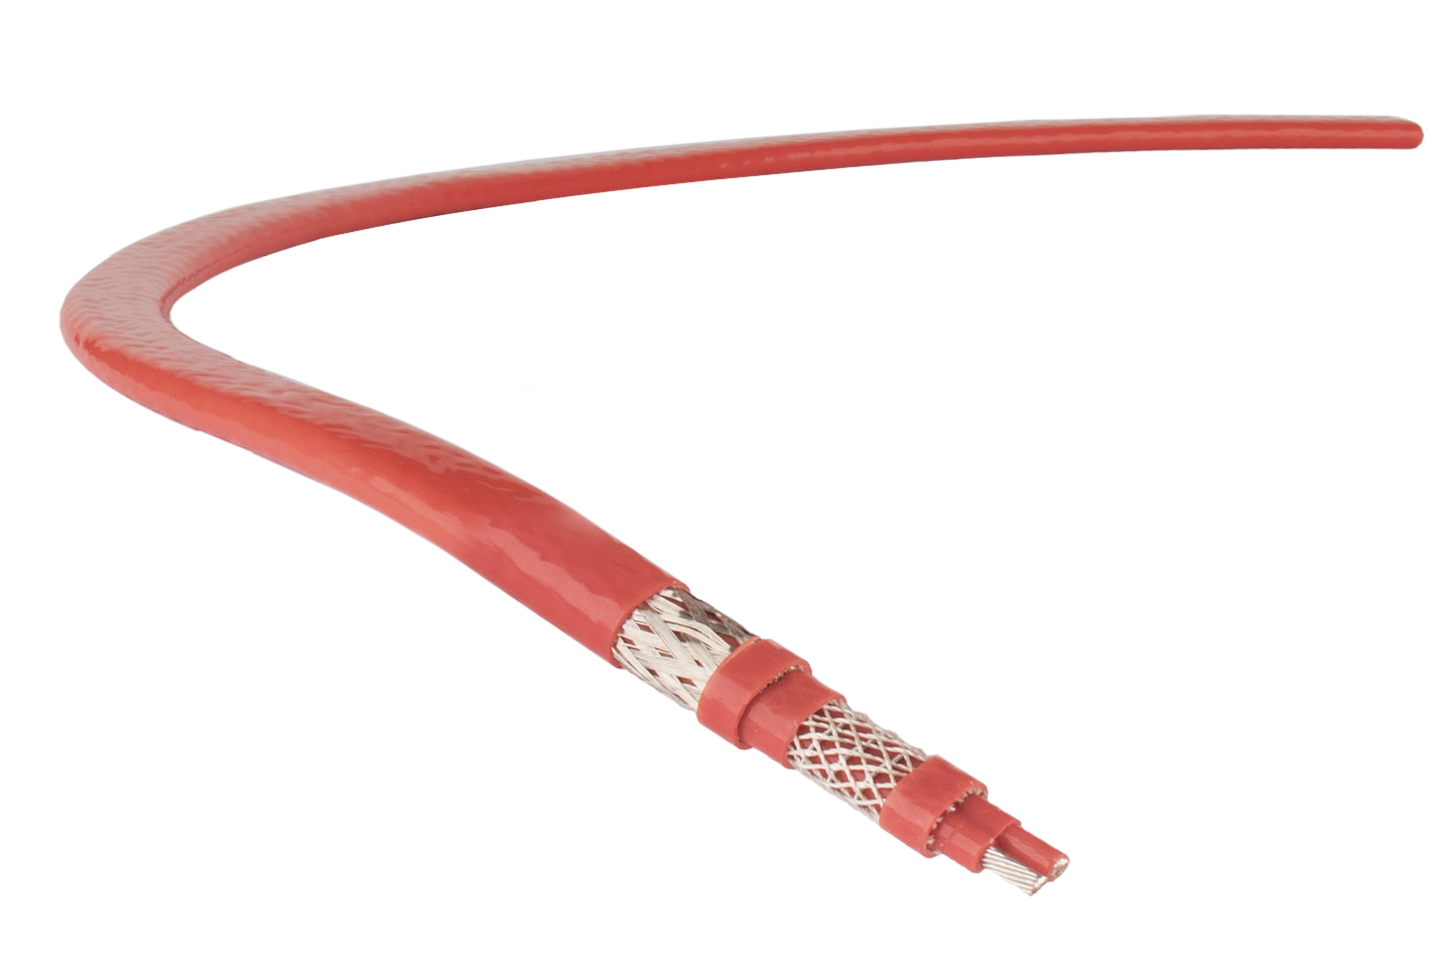 electricity clipart network cable